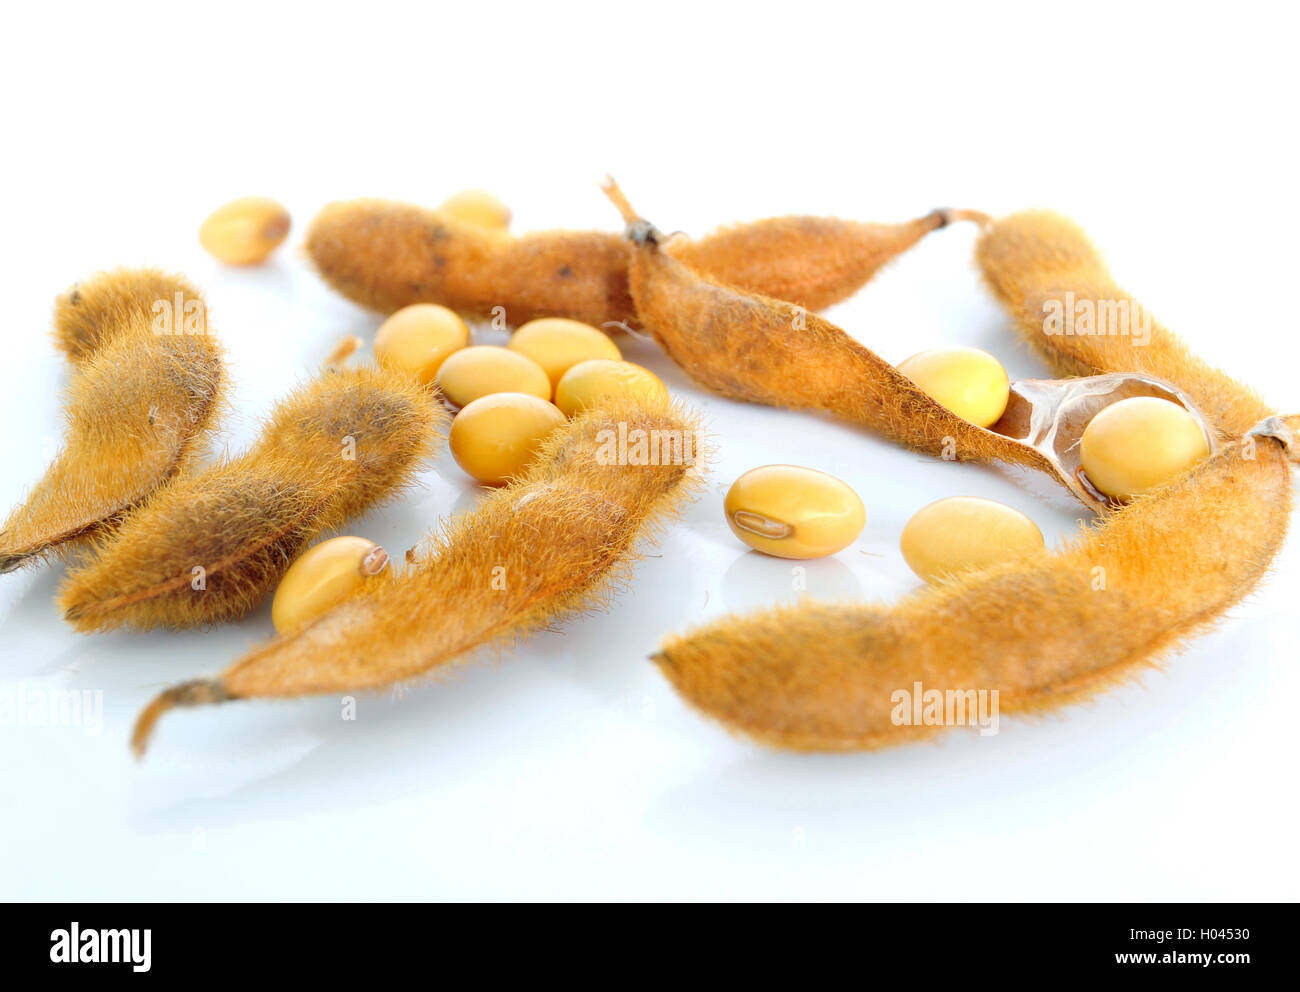 Soy bean seeds on a white background Stock Photo